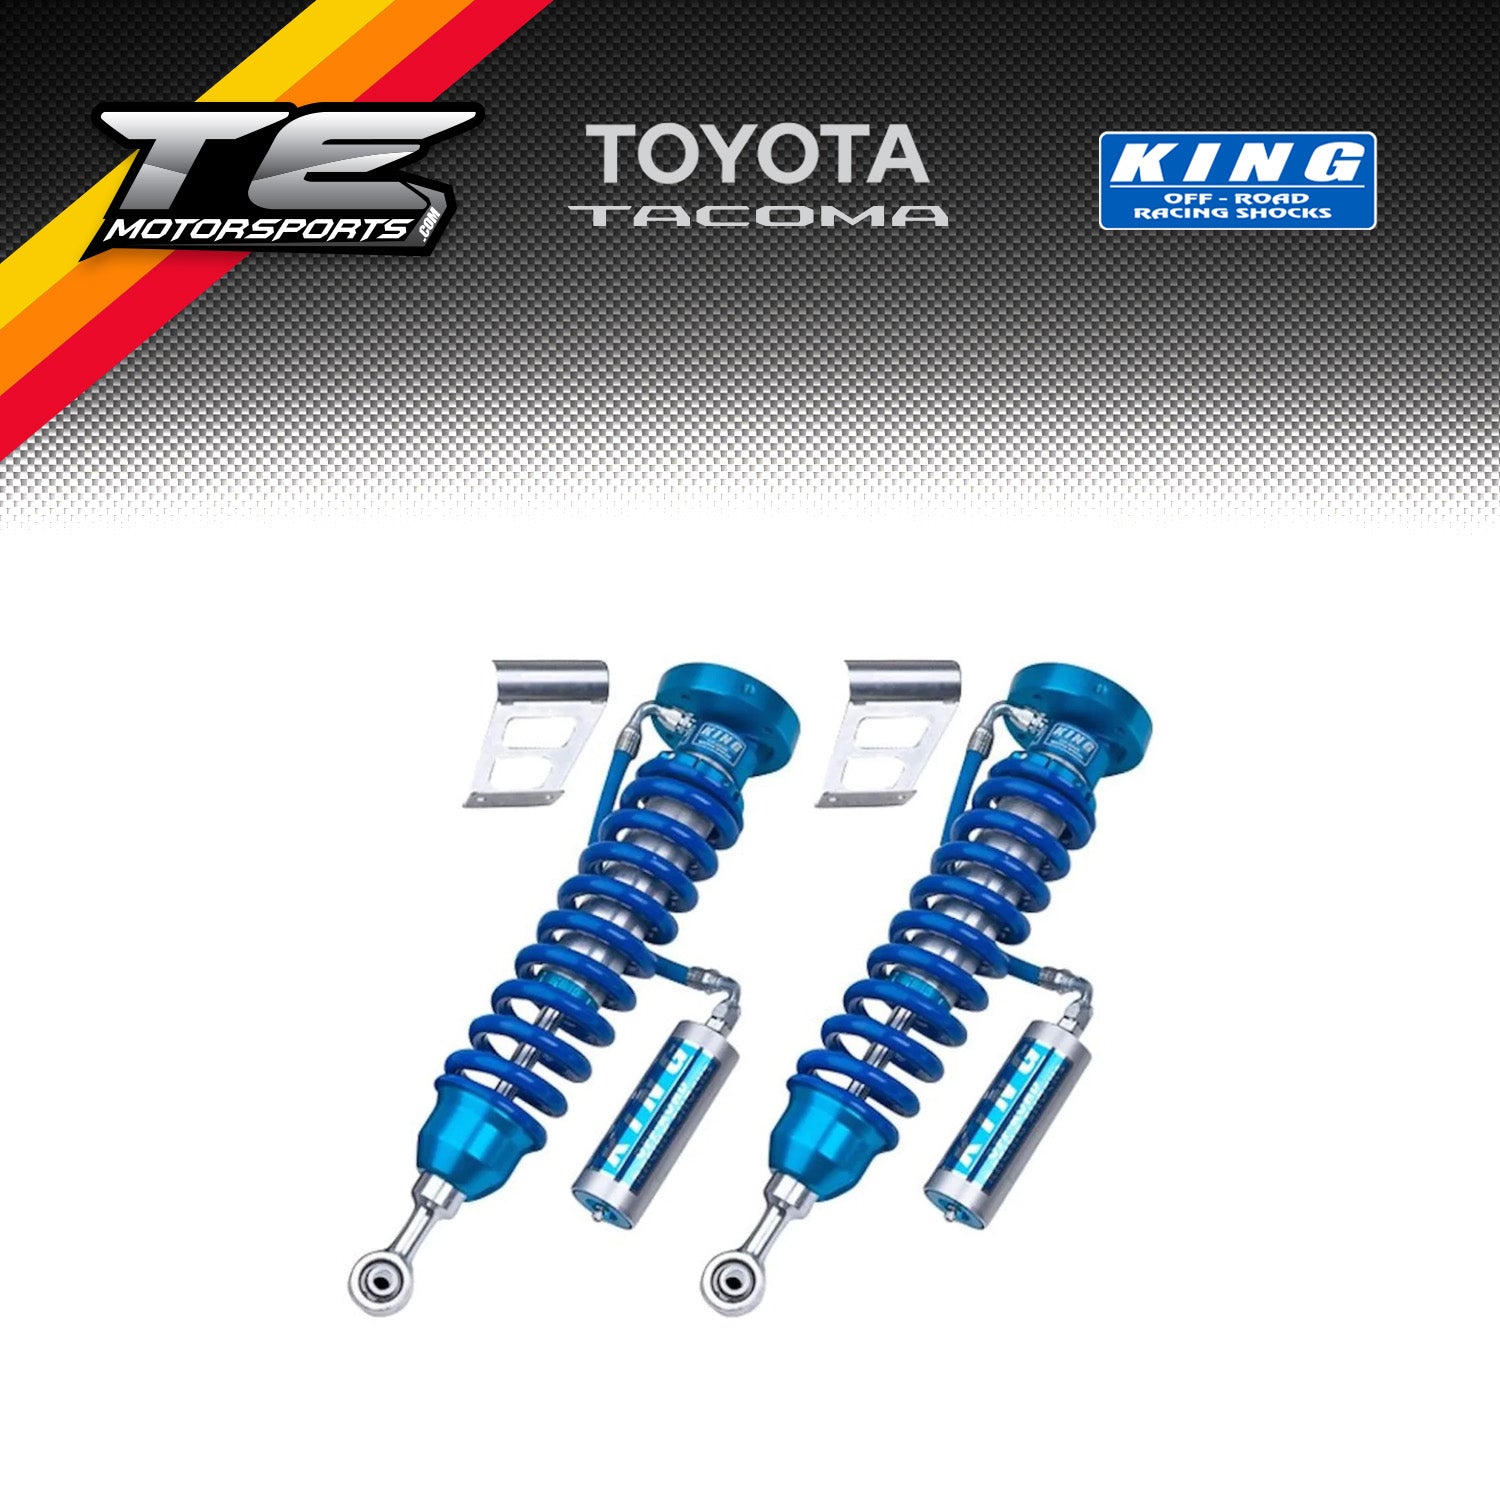 King Shocks Toyota Tacoma 05 Front Coil Over 2.5 RR Pair